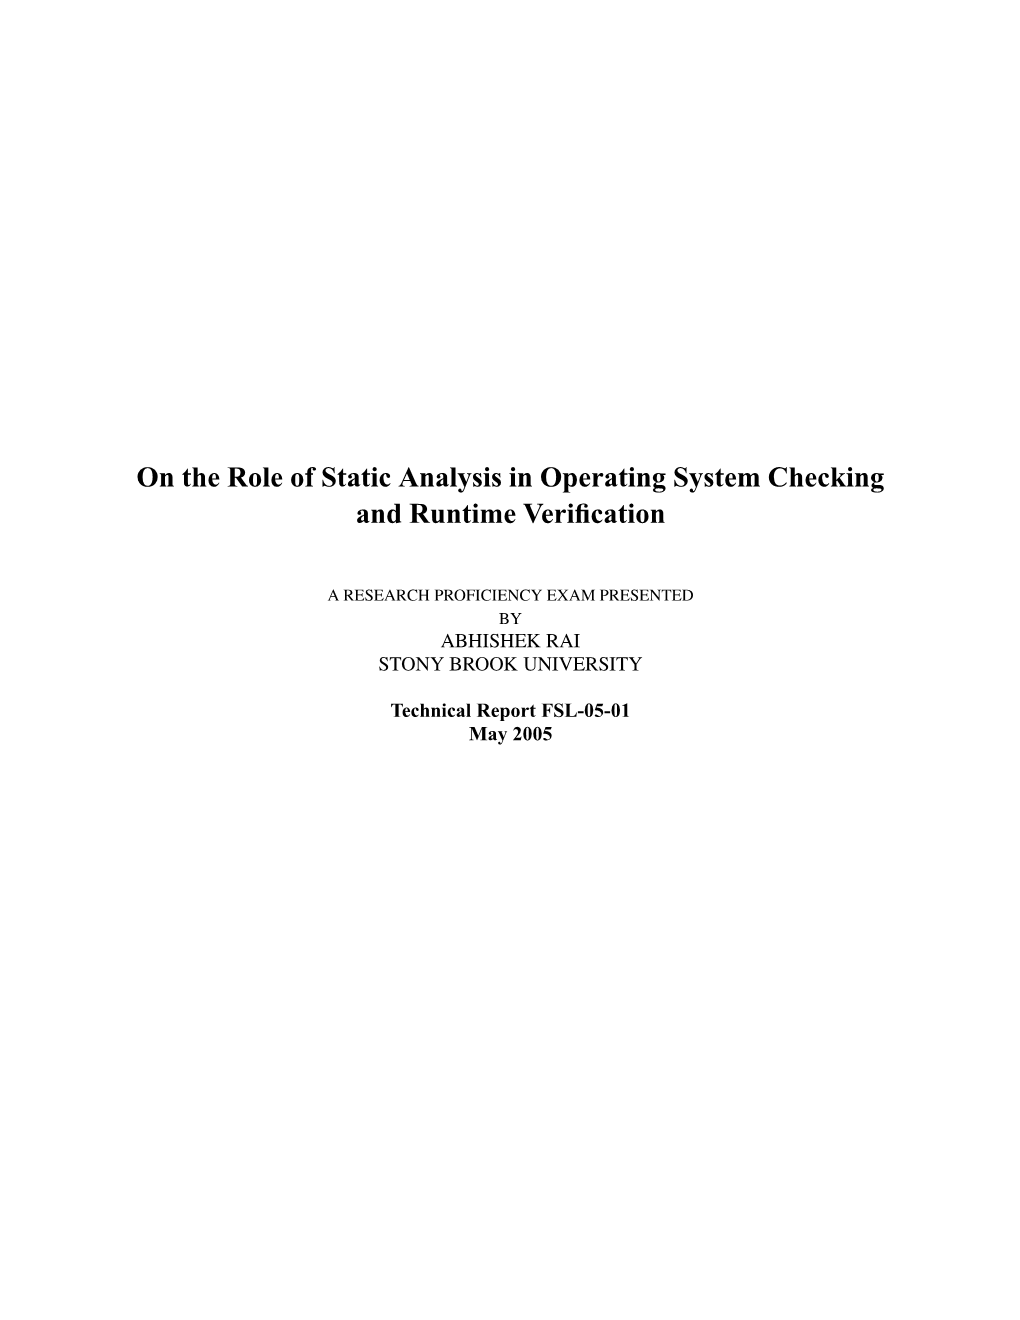 On the Role of Static Analysis in Operating System Checking and Runtime Verification